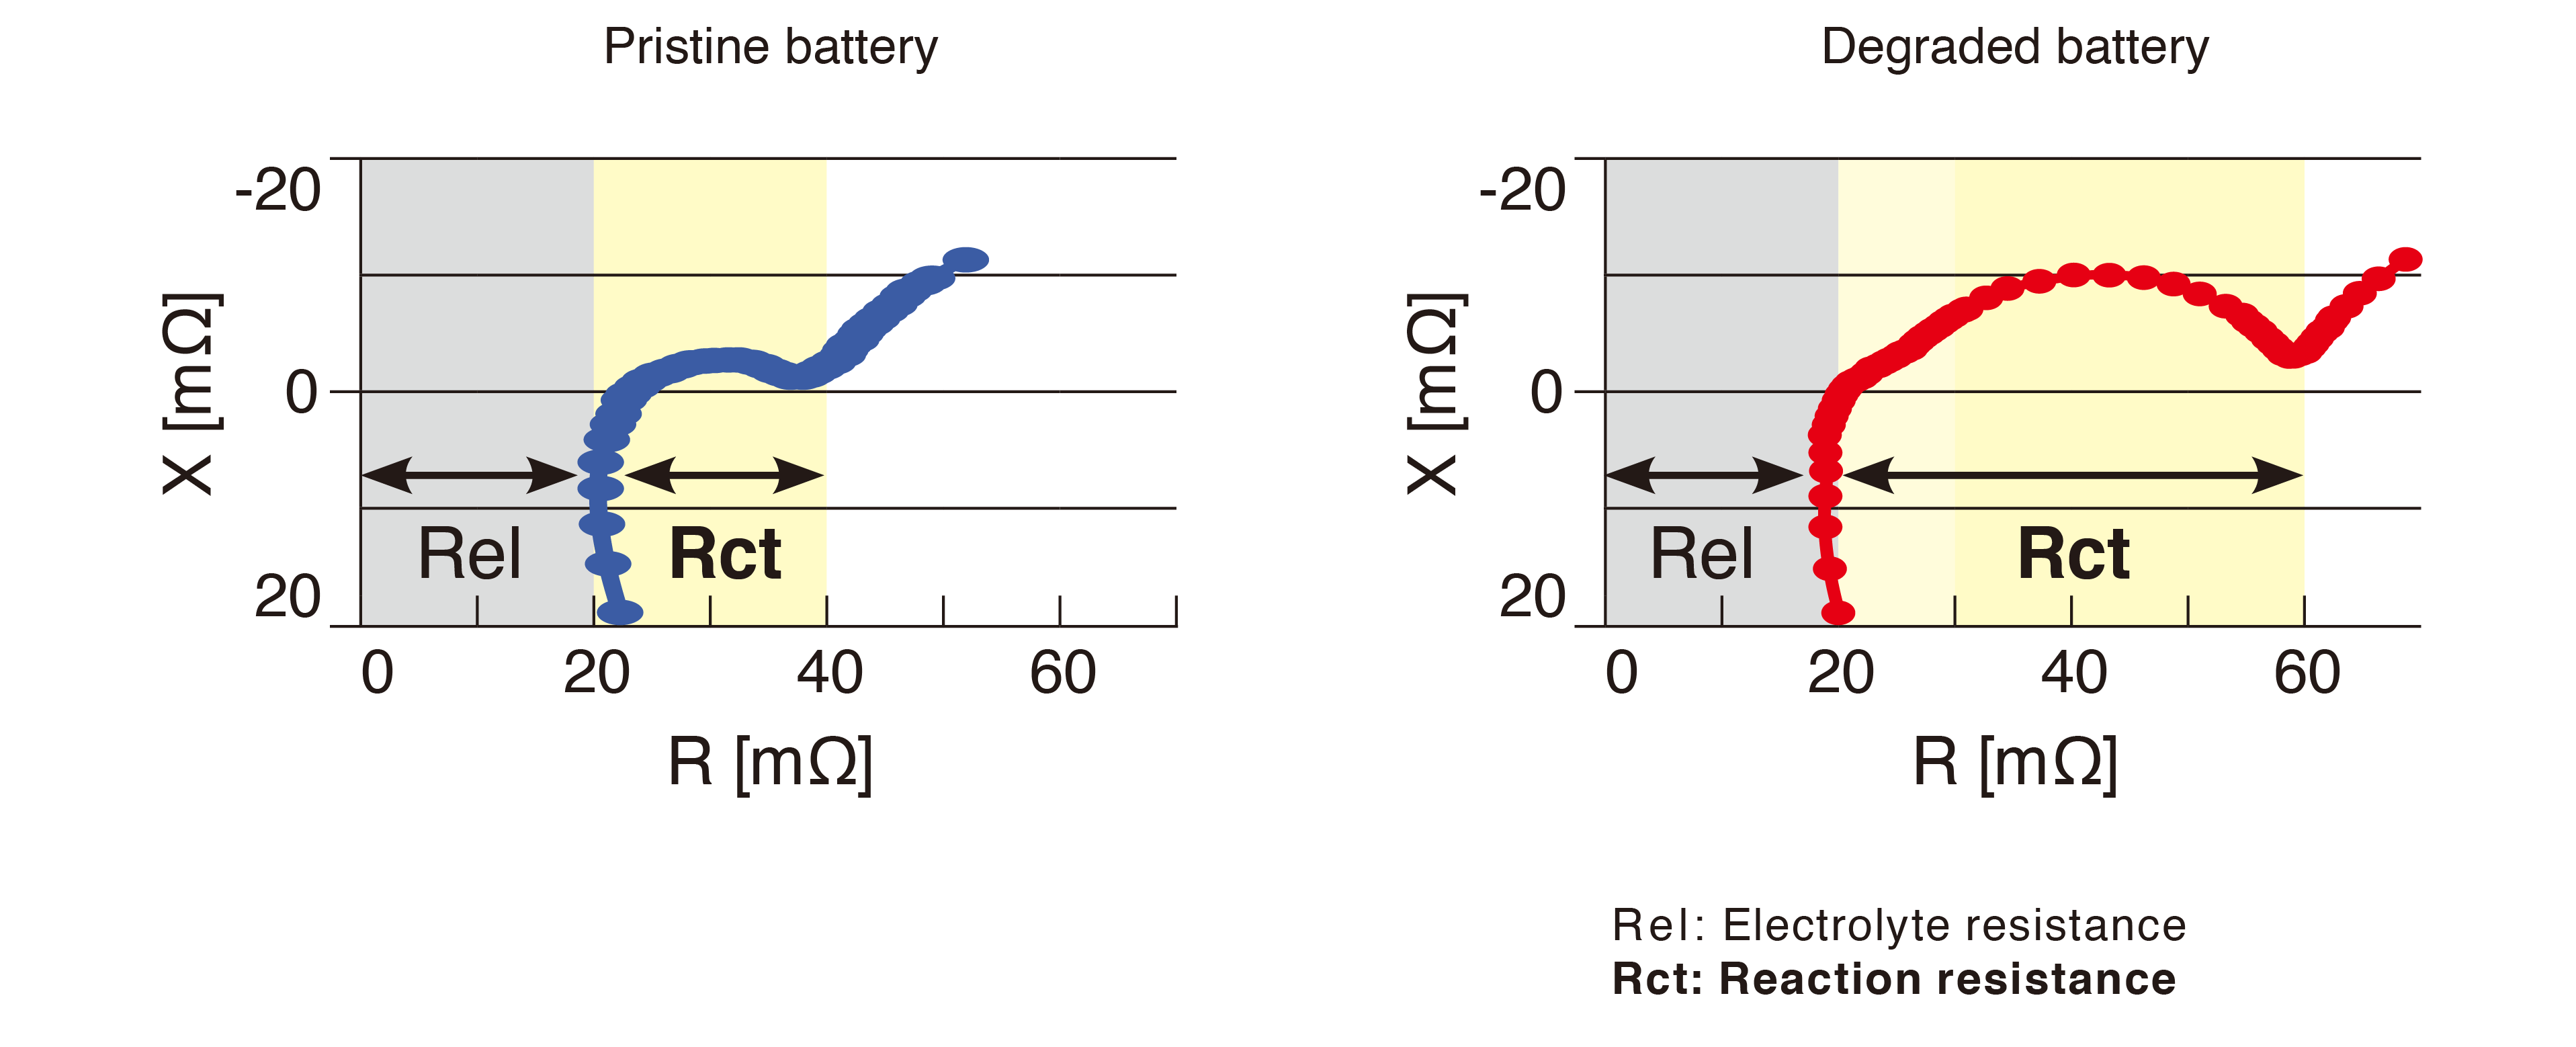 Comparing the measured data for pristine and deteriorated lithium-ion batteries with the Nyquist plot